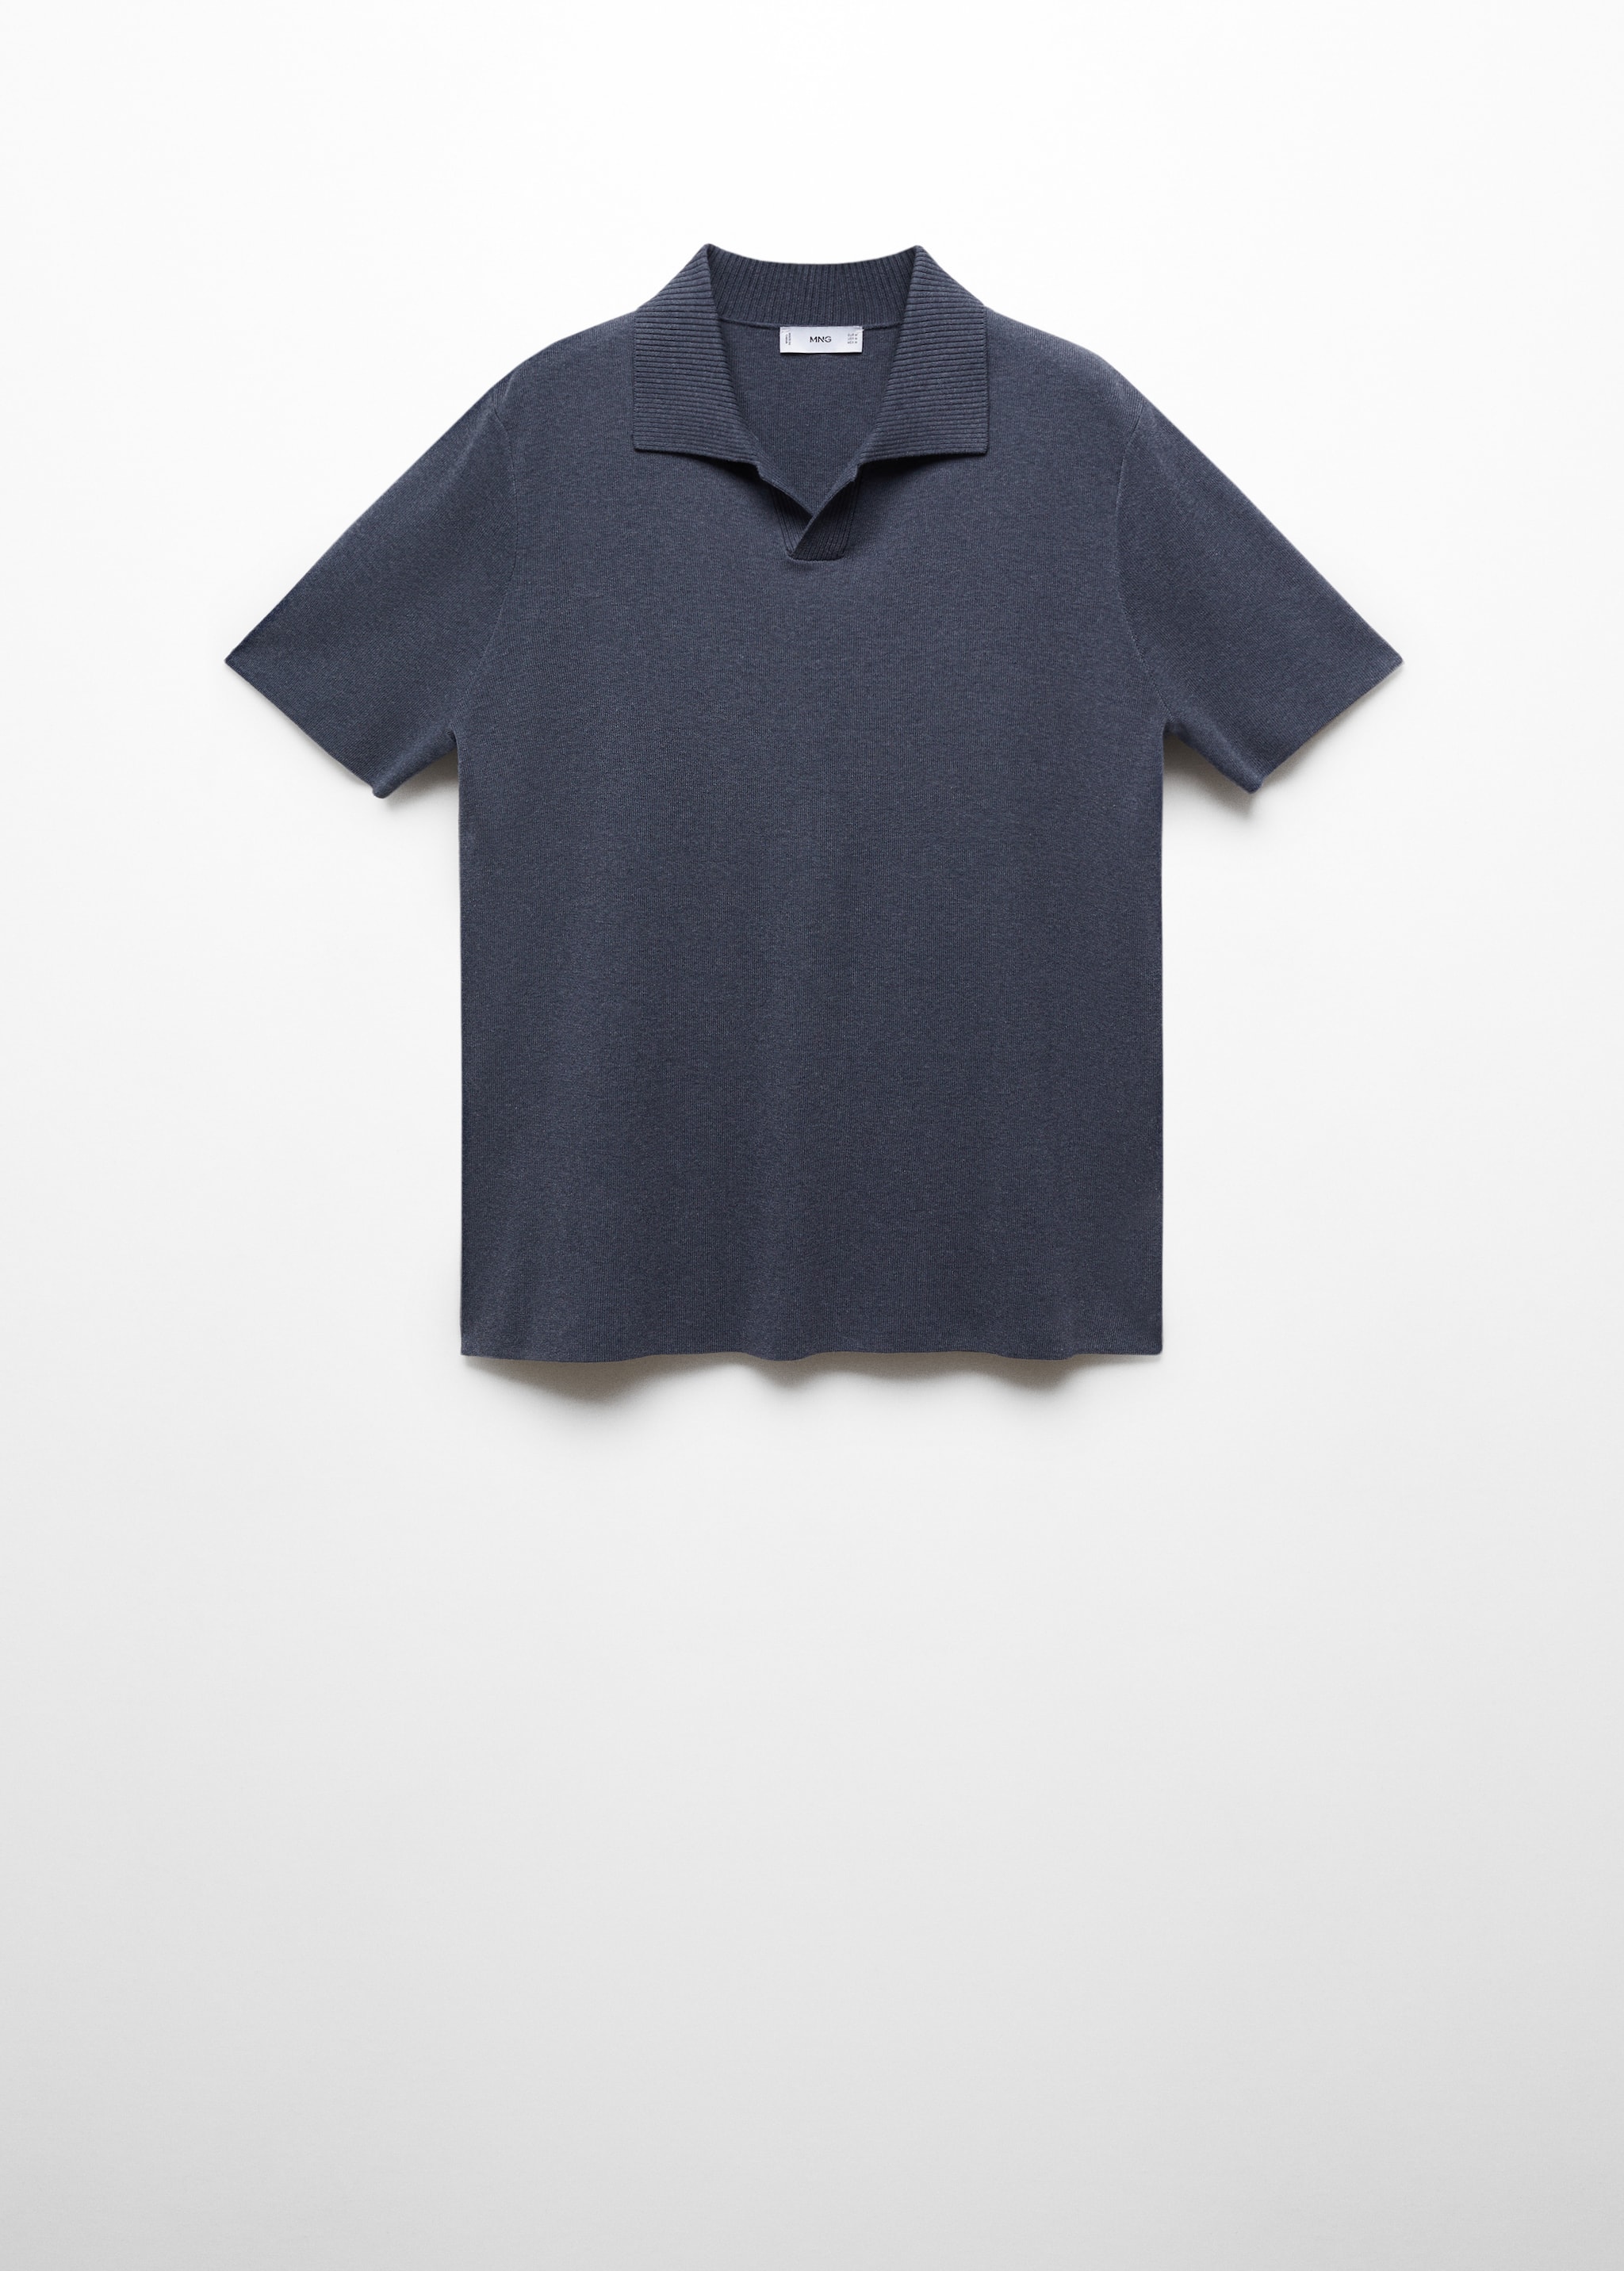 Fine knit cotton polo shirt - Article without model